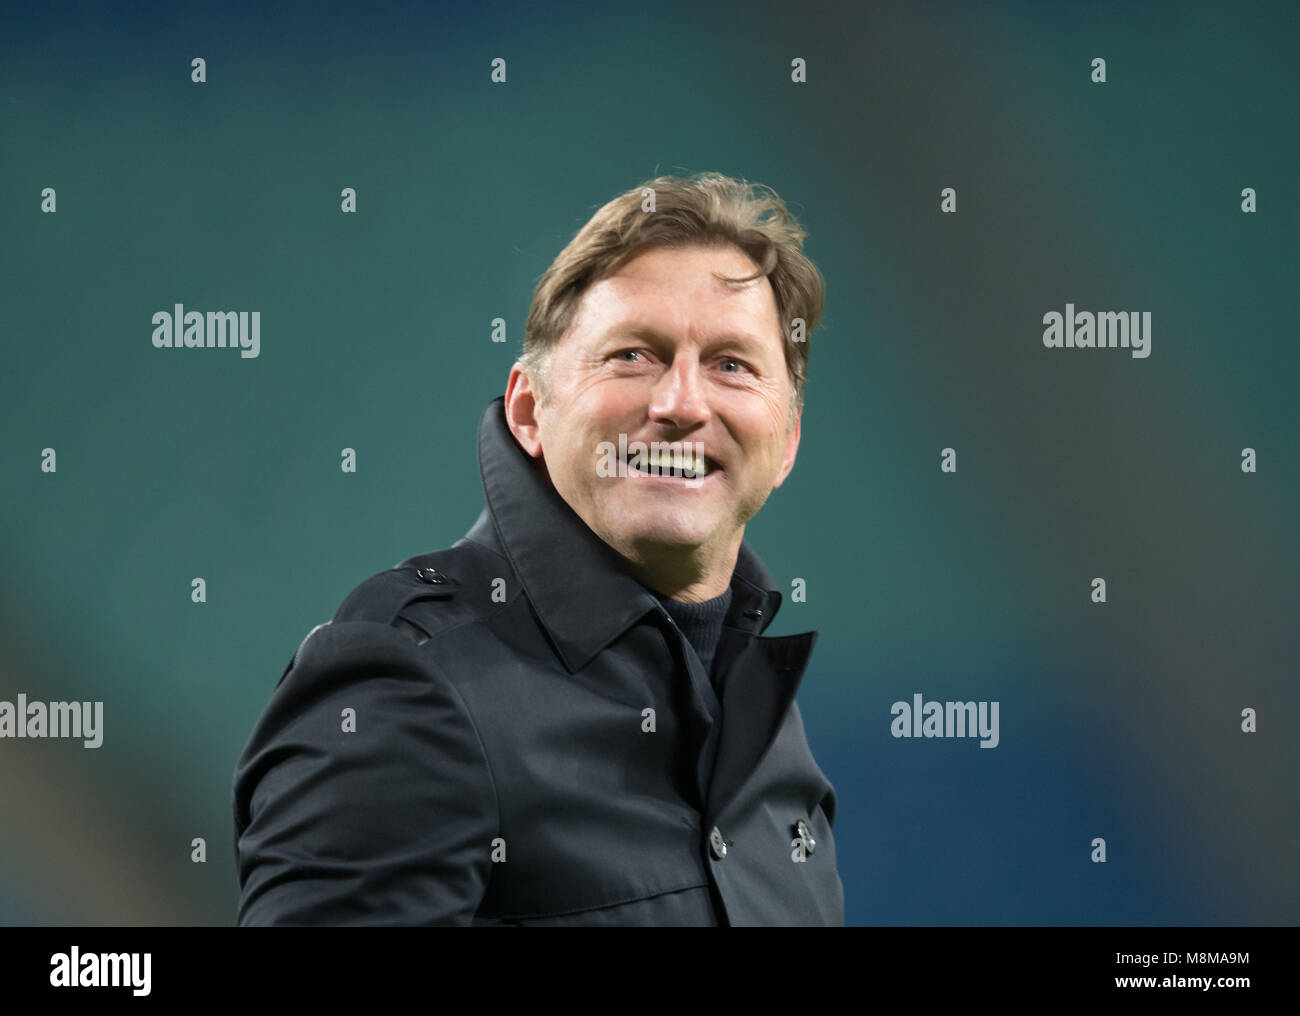 18 March 2018, Germany, Leipzig: Soccer, 1. Bundesliga, RB Leipzig vs Bayern Munich at the Red Bull Arena. Leipzig's coach Ralph Hasenhuettl waves to the fans after the final whistle. Photo: Soeren Stache/dpa - Nutzung nur nach vertraglicher Vereinbarung Stock Photo